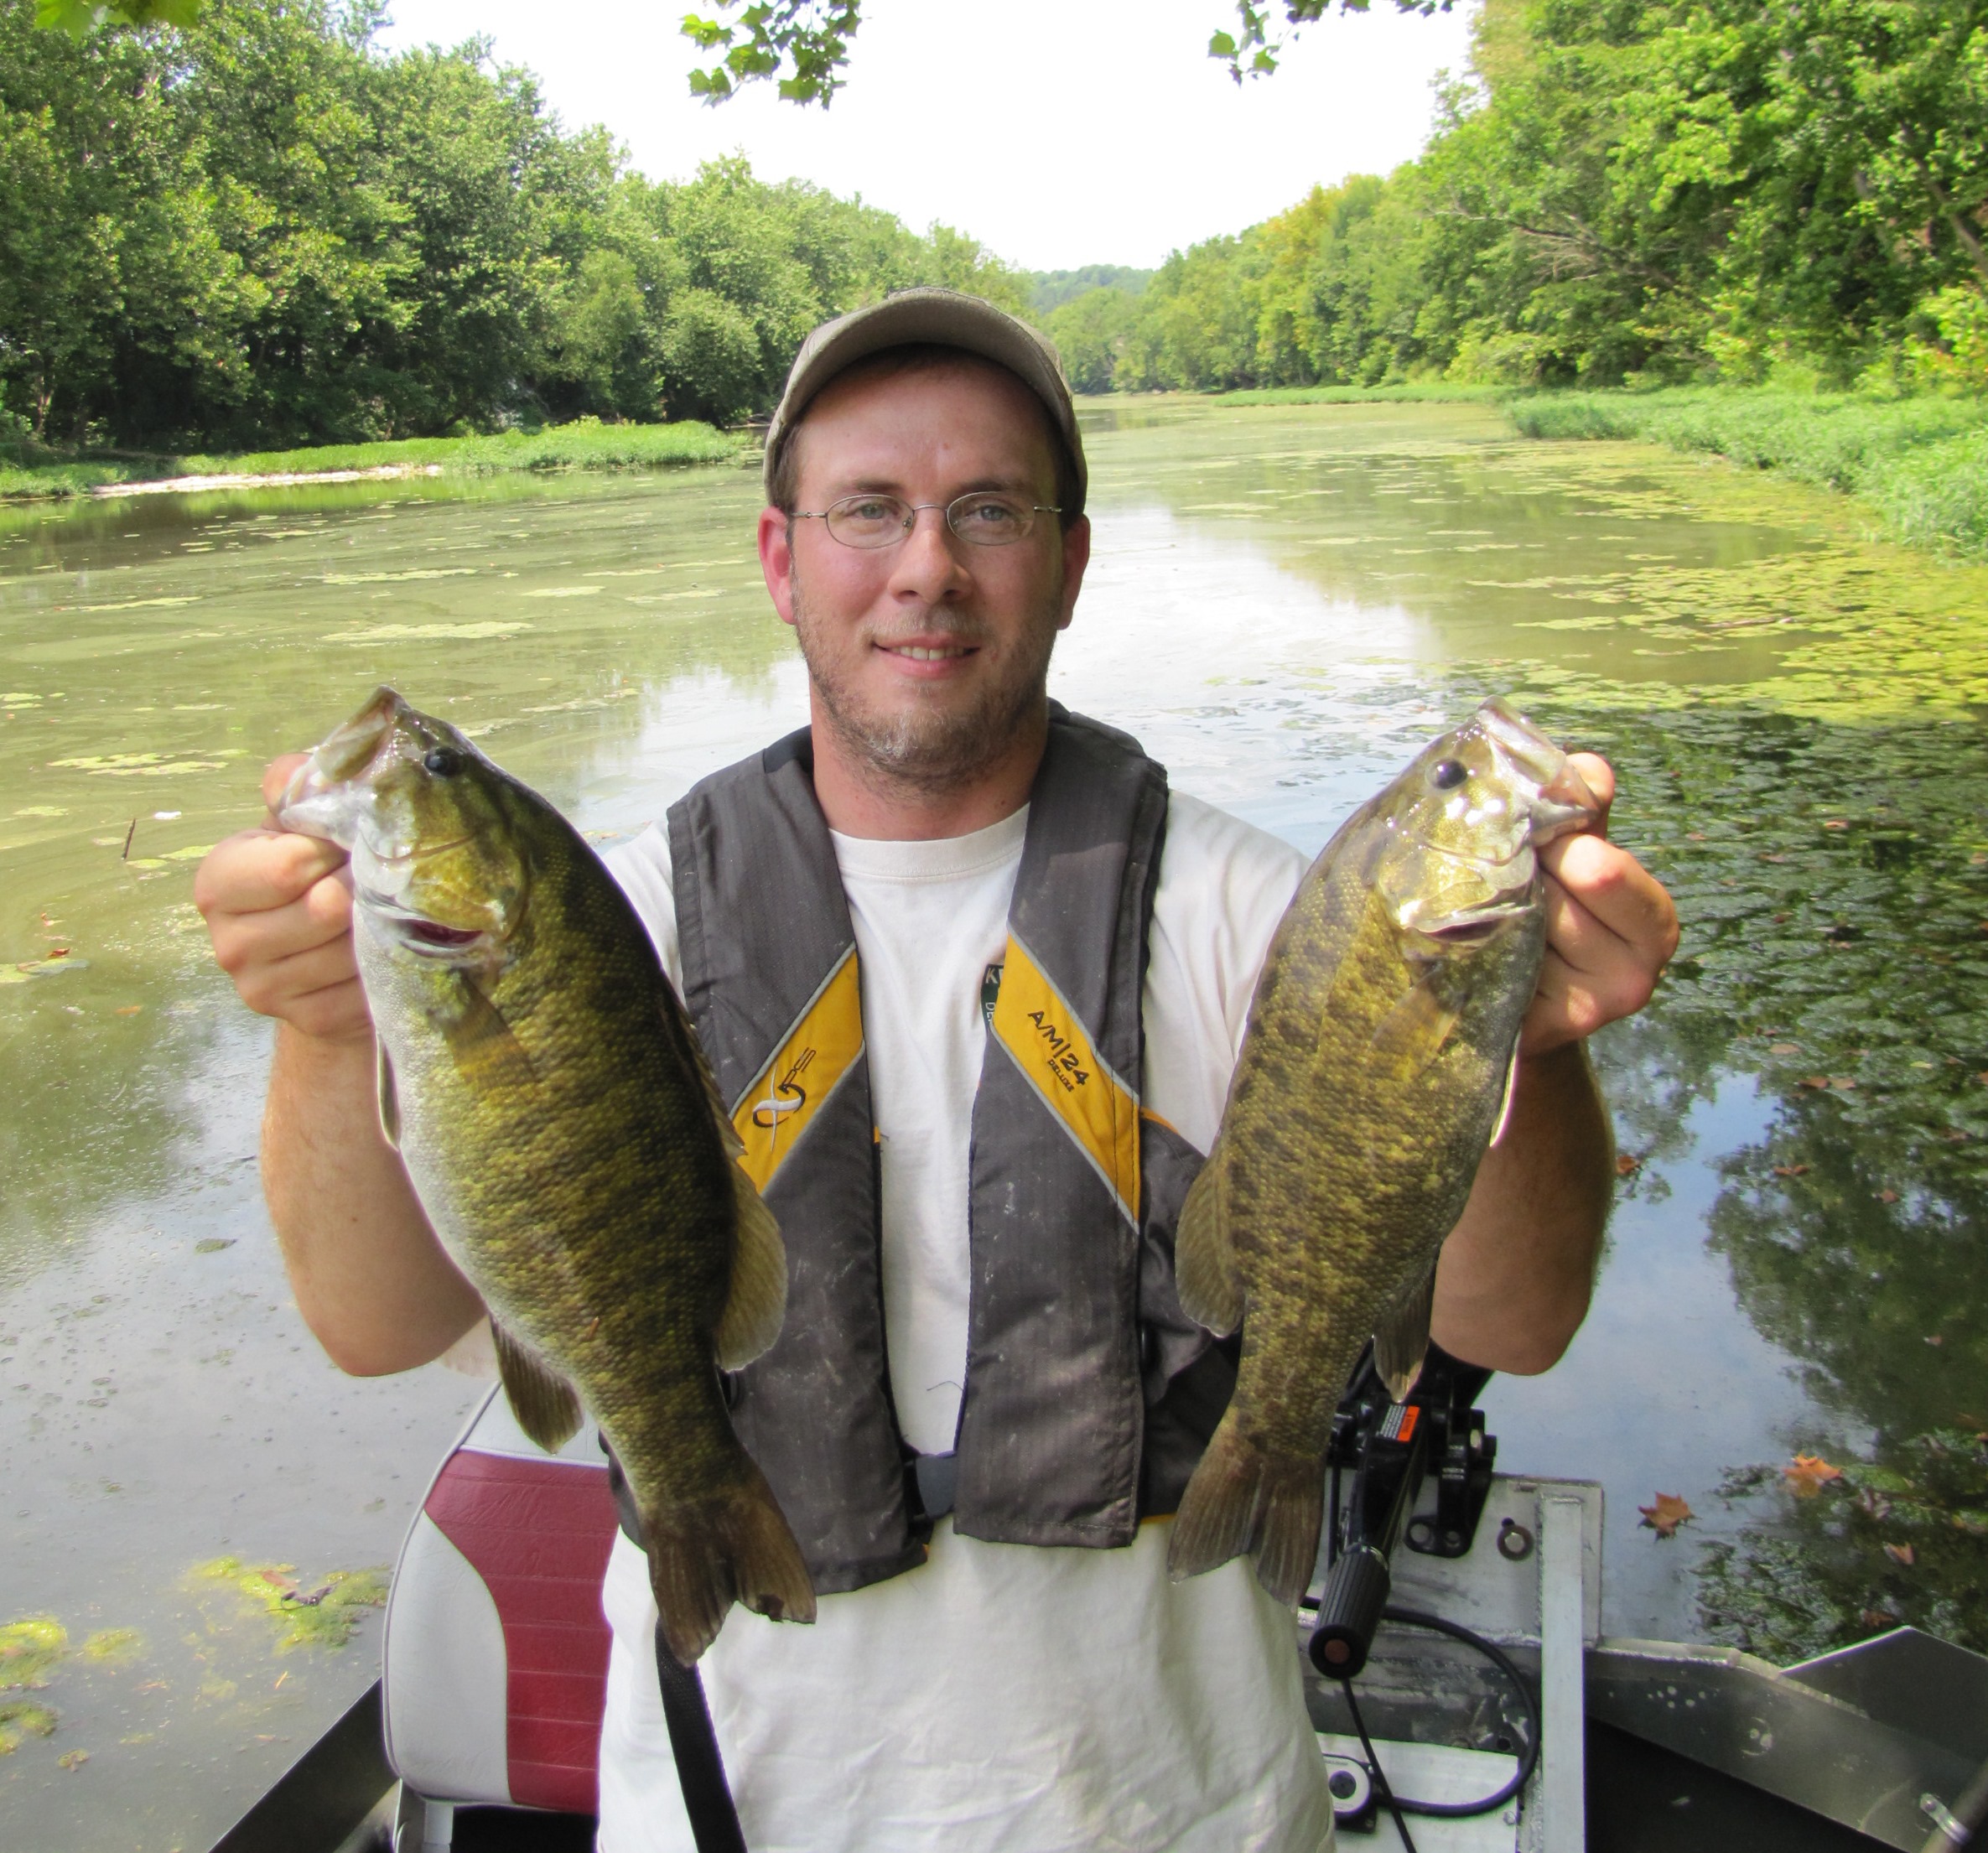 Quality smallmouth bass up to 18.5 inches were collected and released during sport fish surveys.